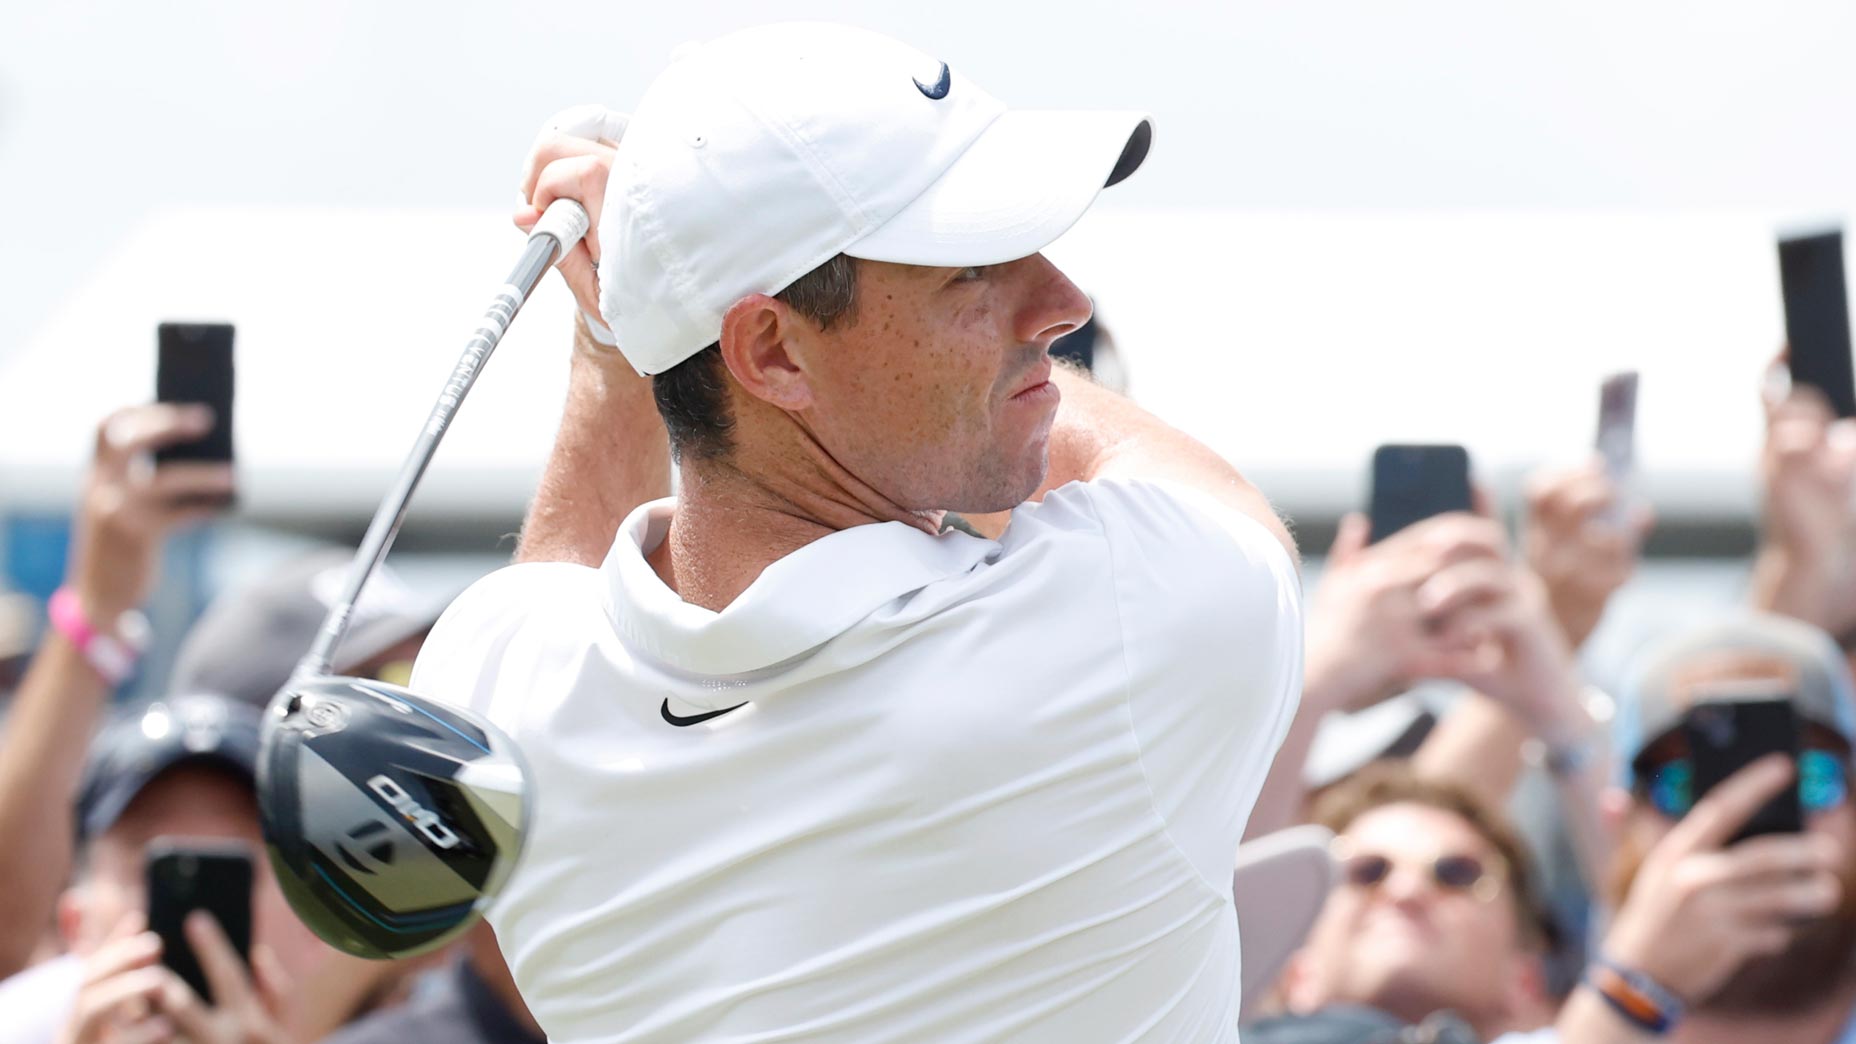 Pro golfer Rory McIlroy hits drive at Zurich Classic.